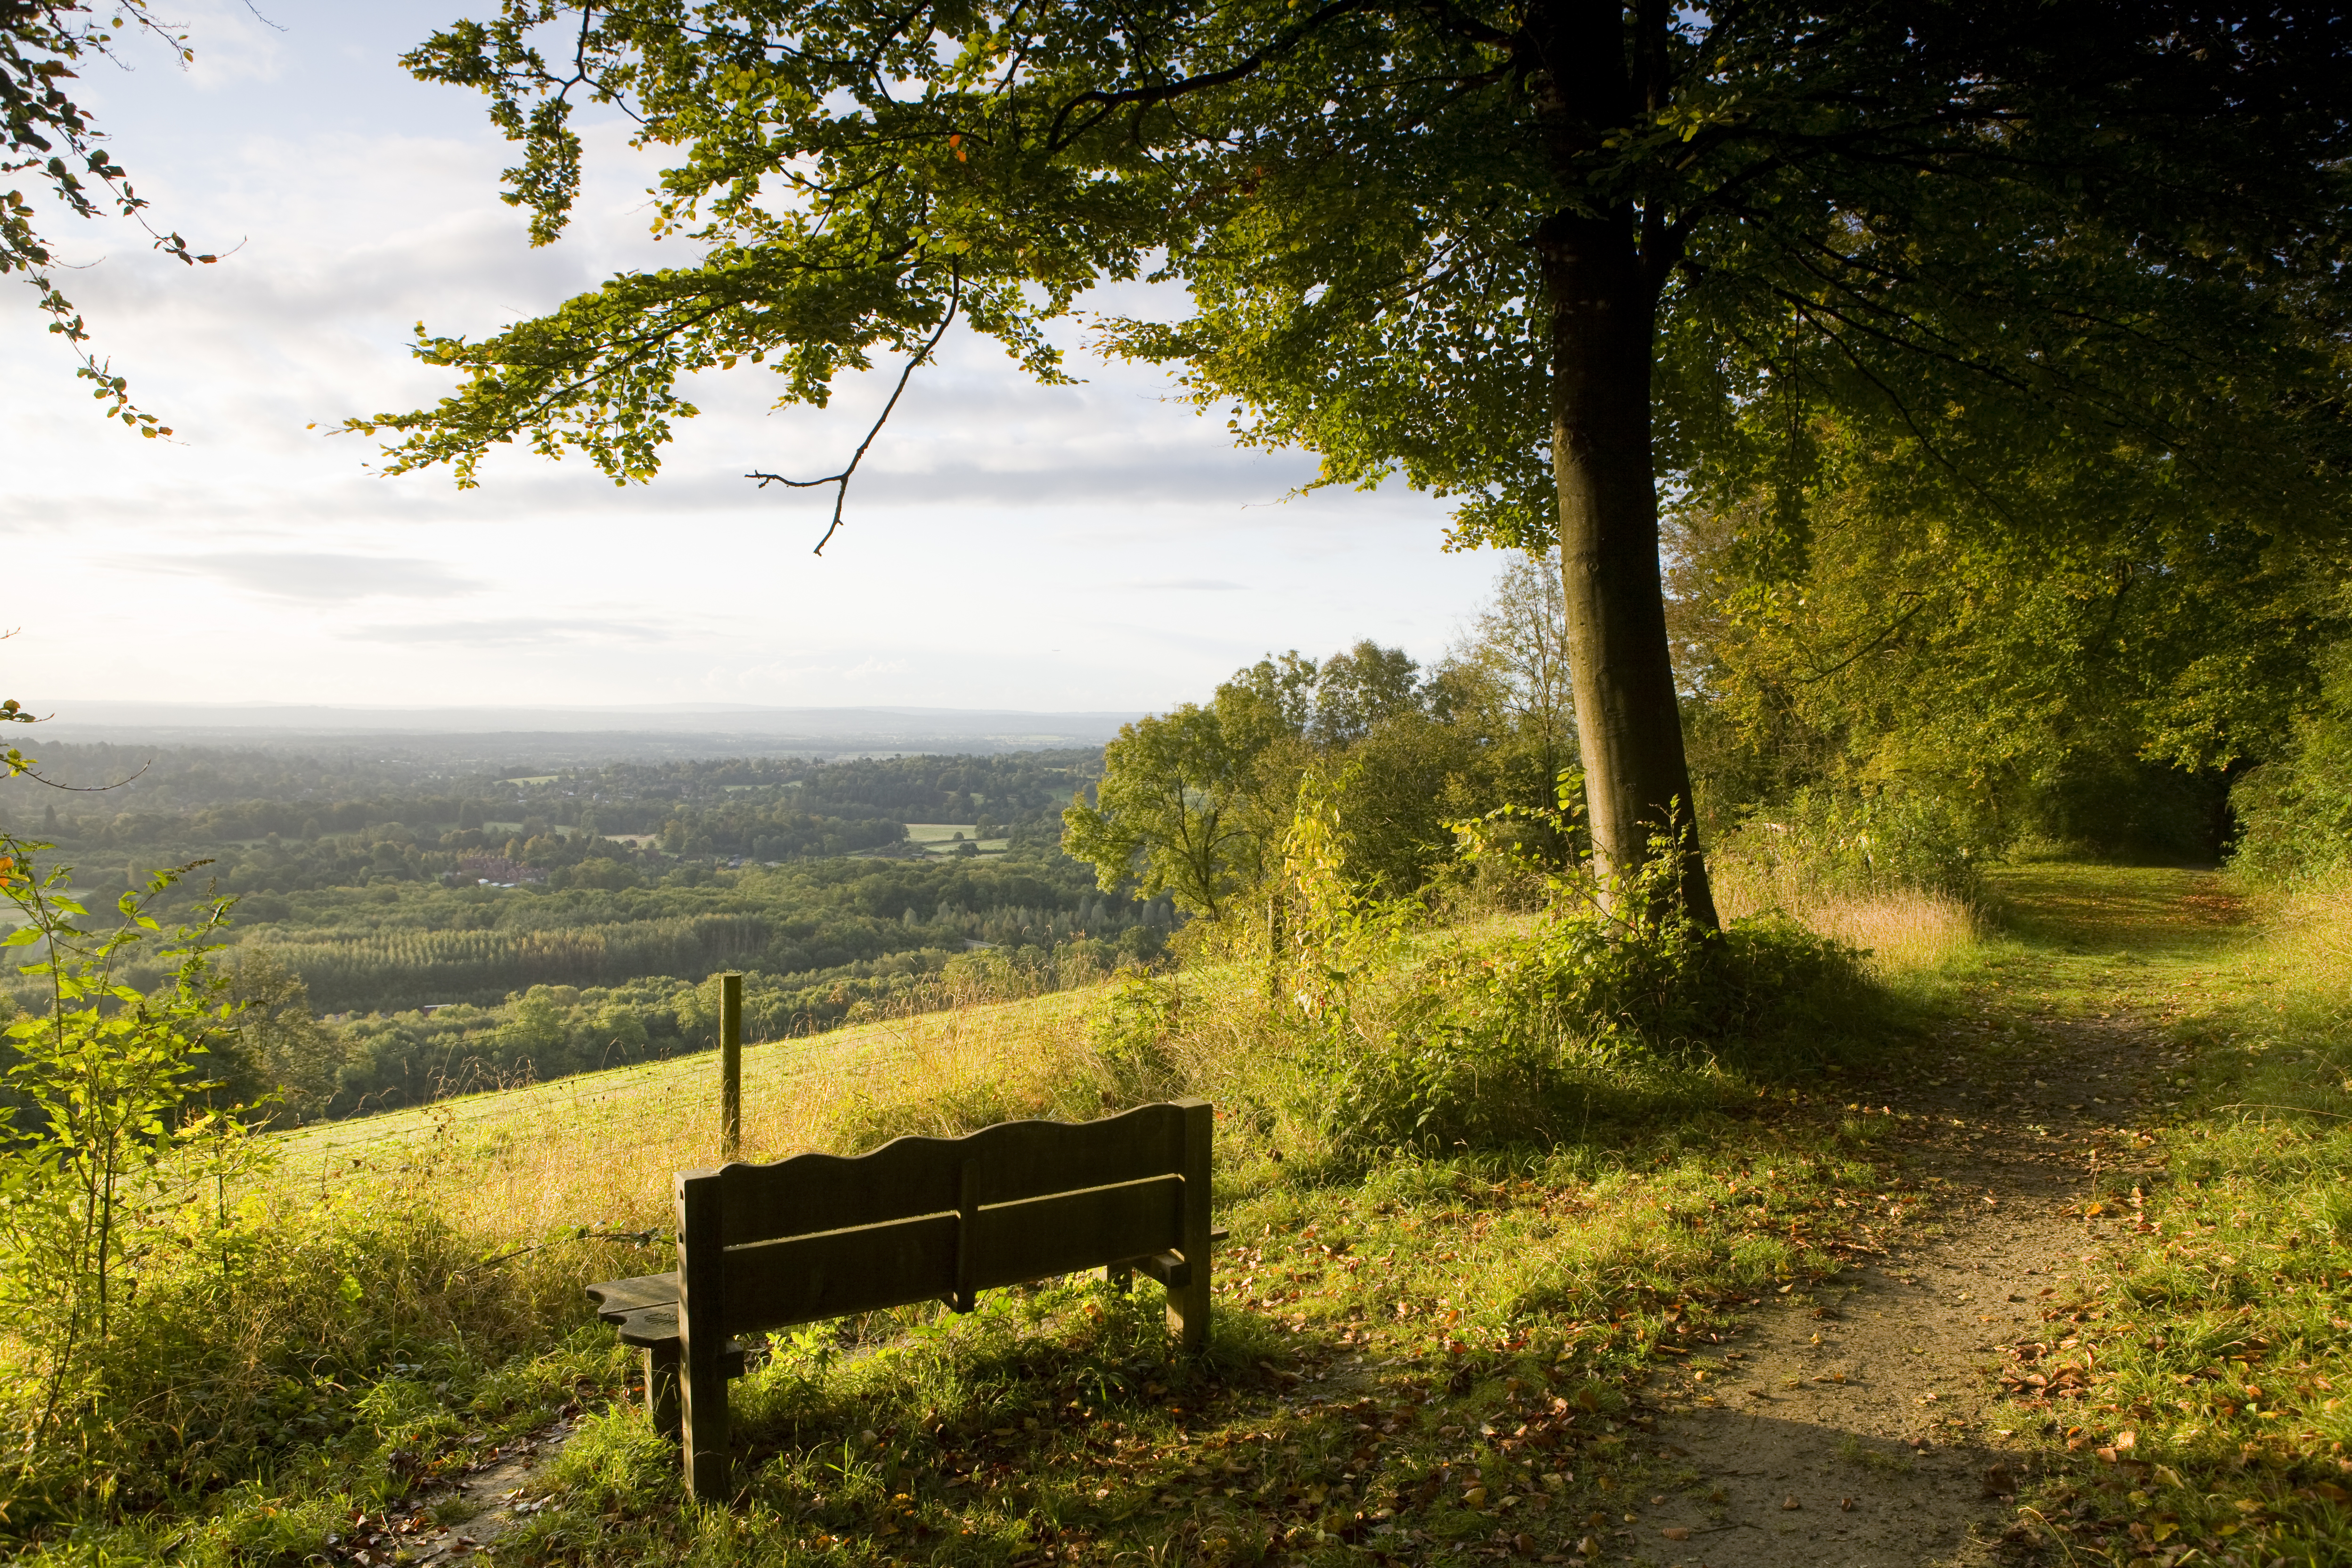 A bench under a tree sits in front of a view across woods and farmland.